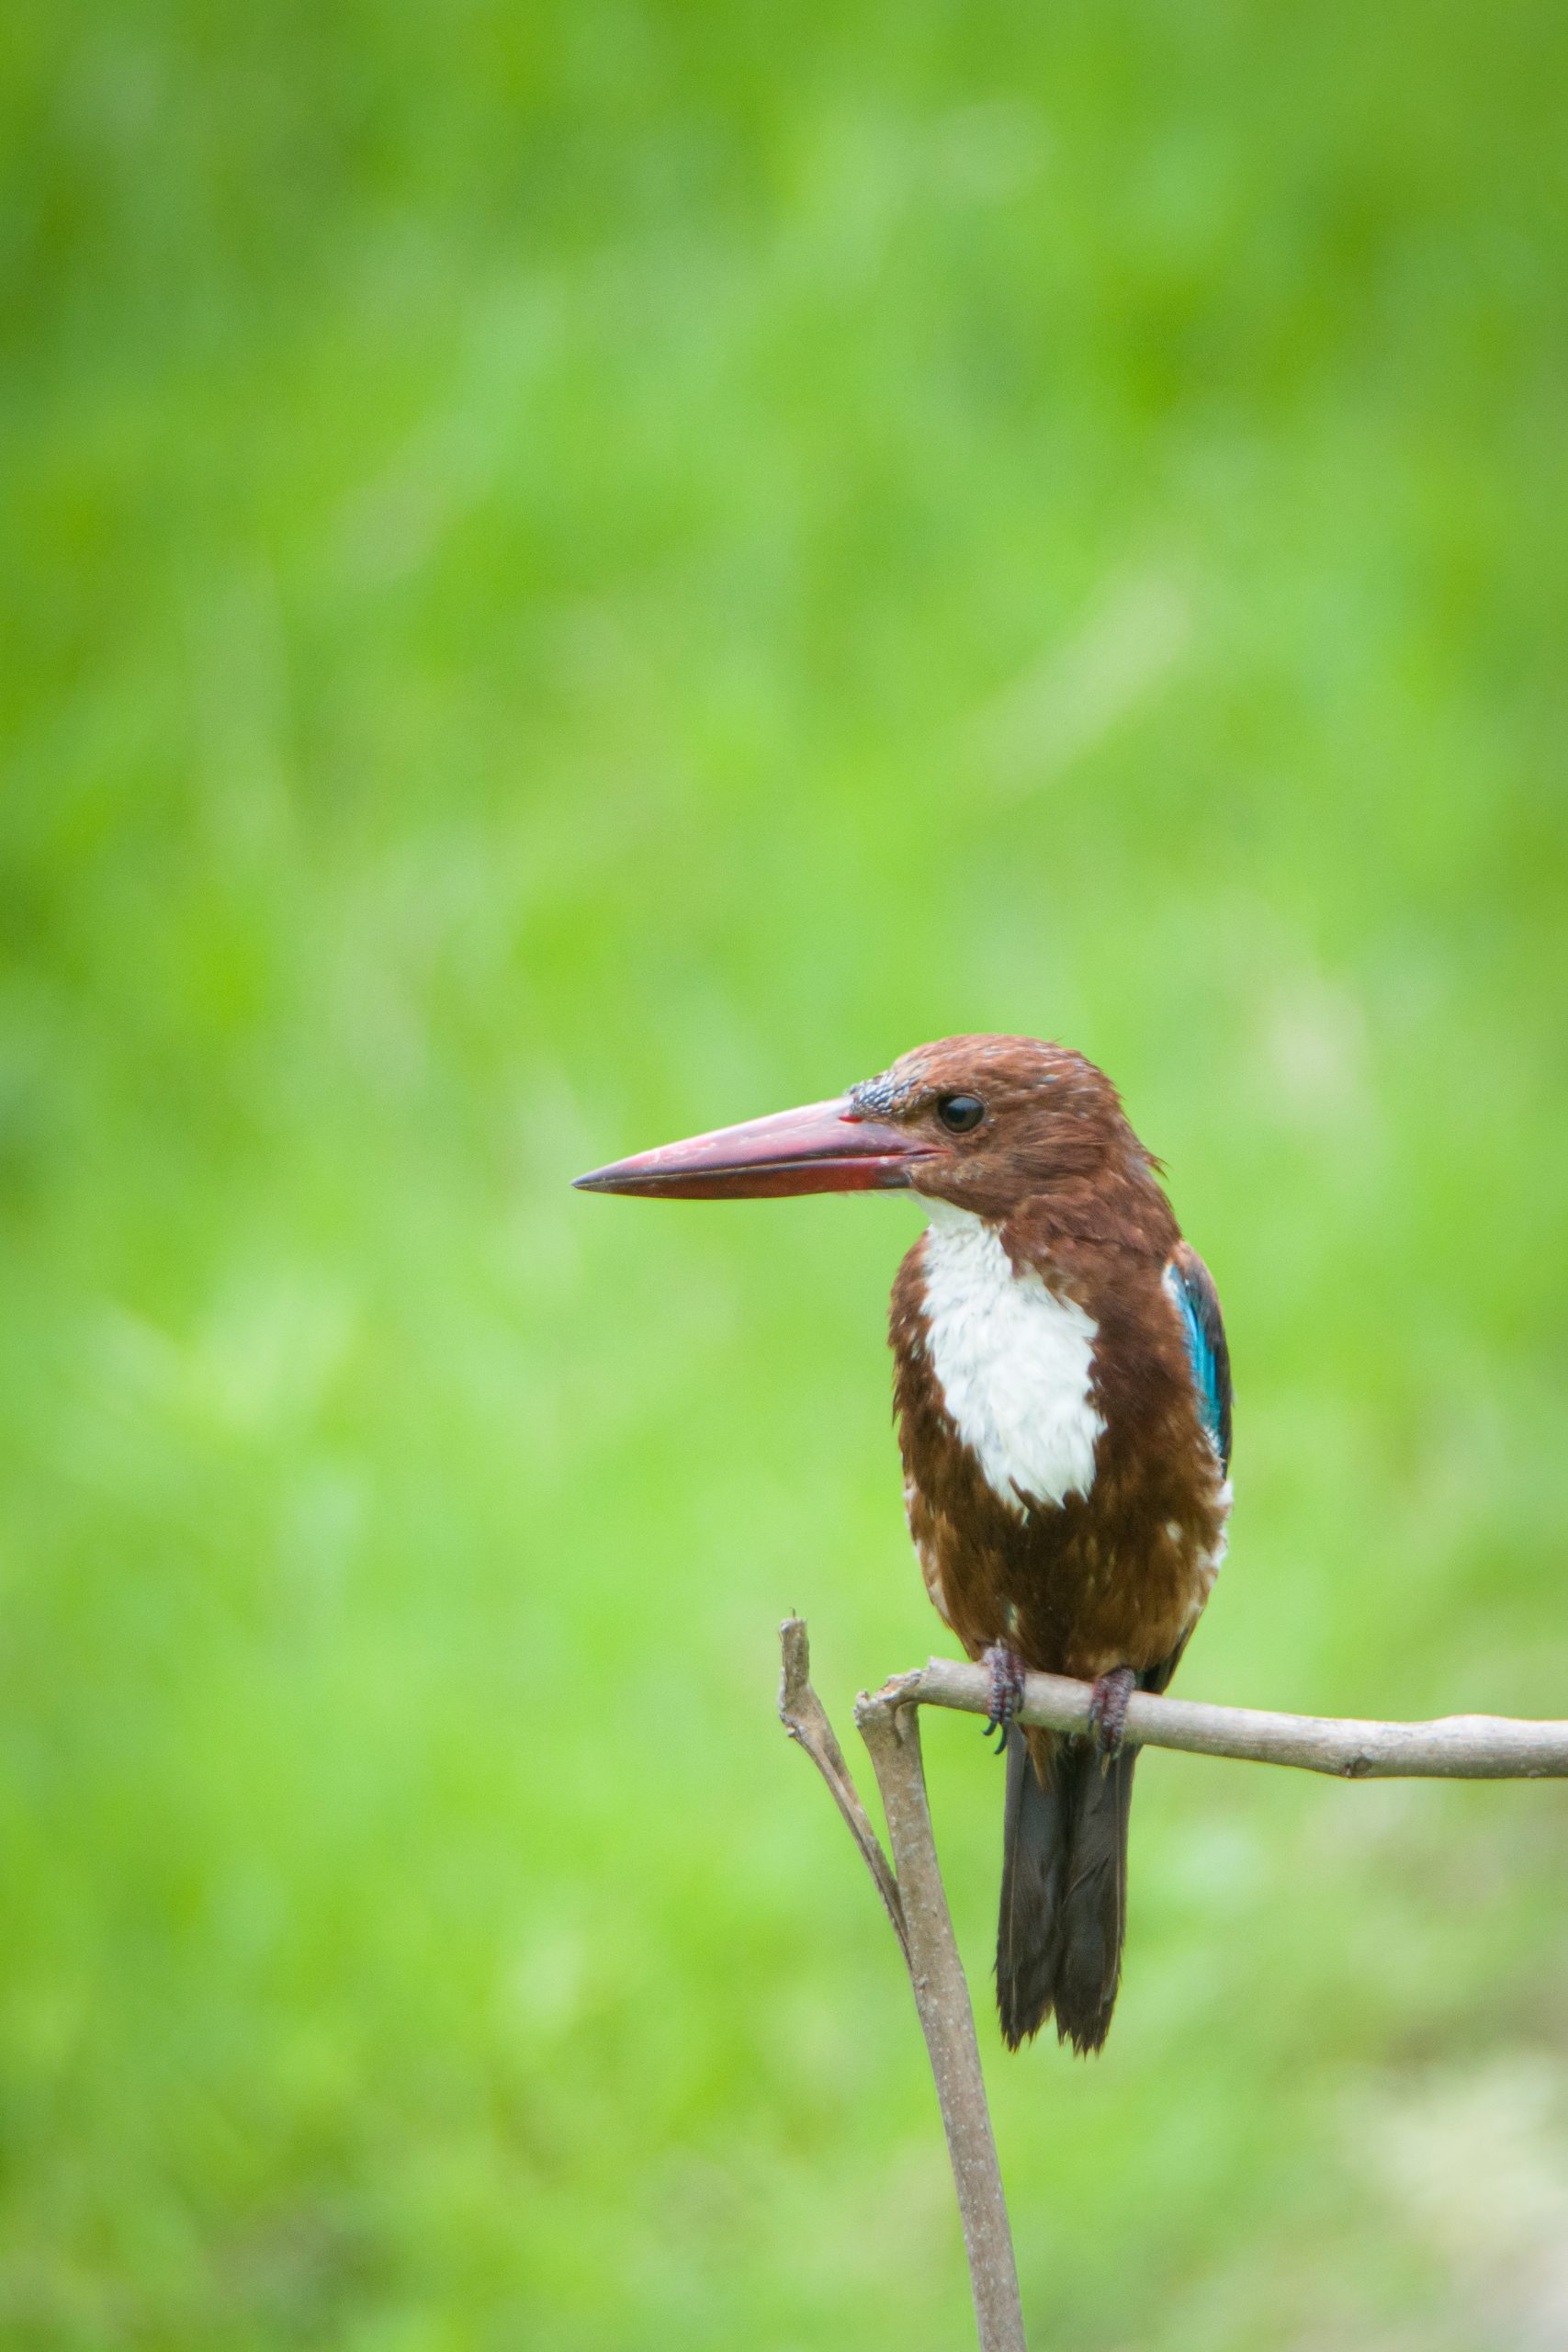 Colourful Kingfisher on a plant